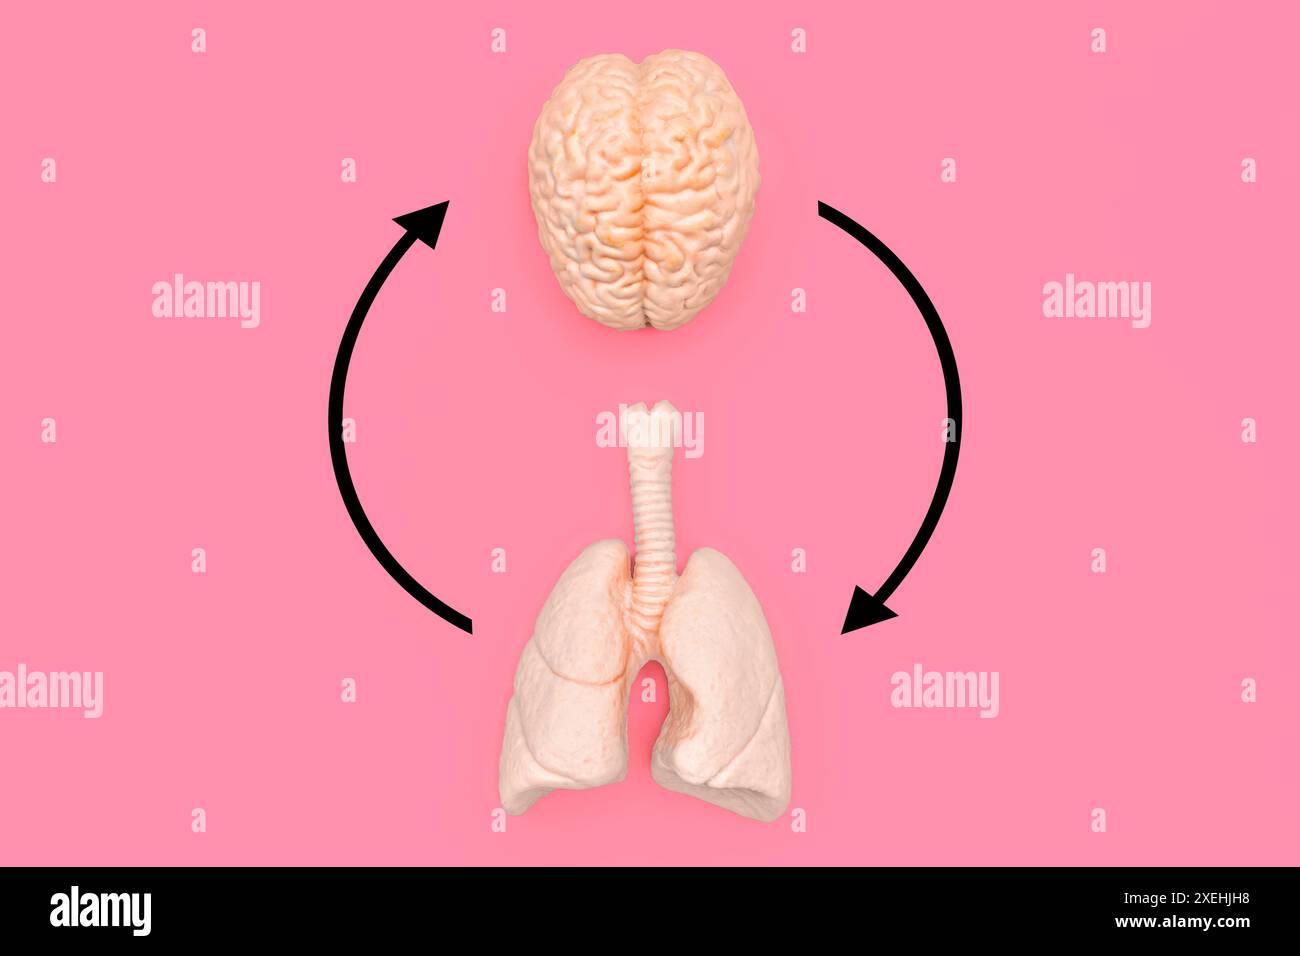 Creative brain-lungs axis concept: Realistic brain and lungs models interconnected by circular arrows on a pink background. Stock Photo